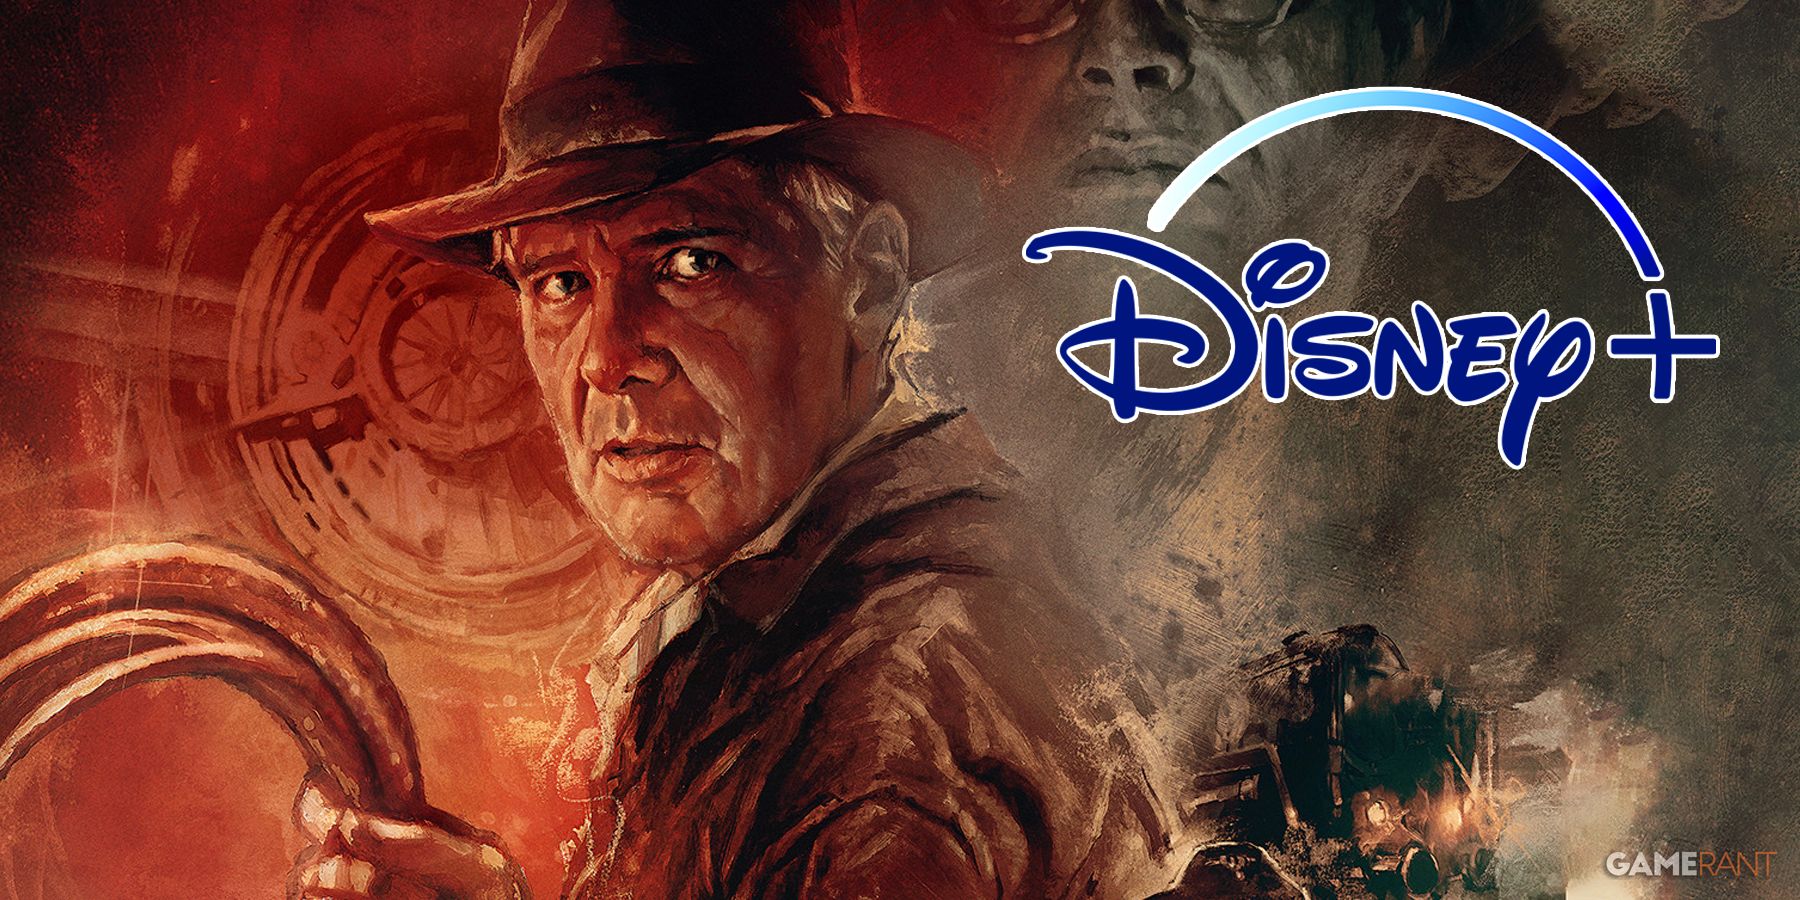 Indiana Jones 5 Release Date For Disney Plus Officially Announced